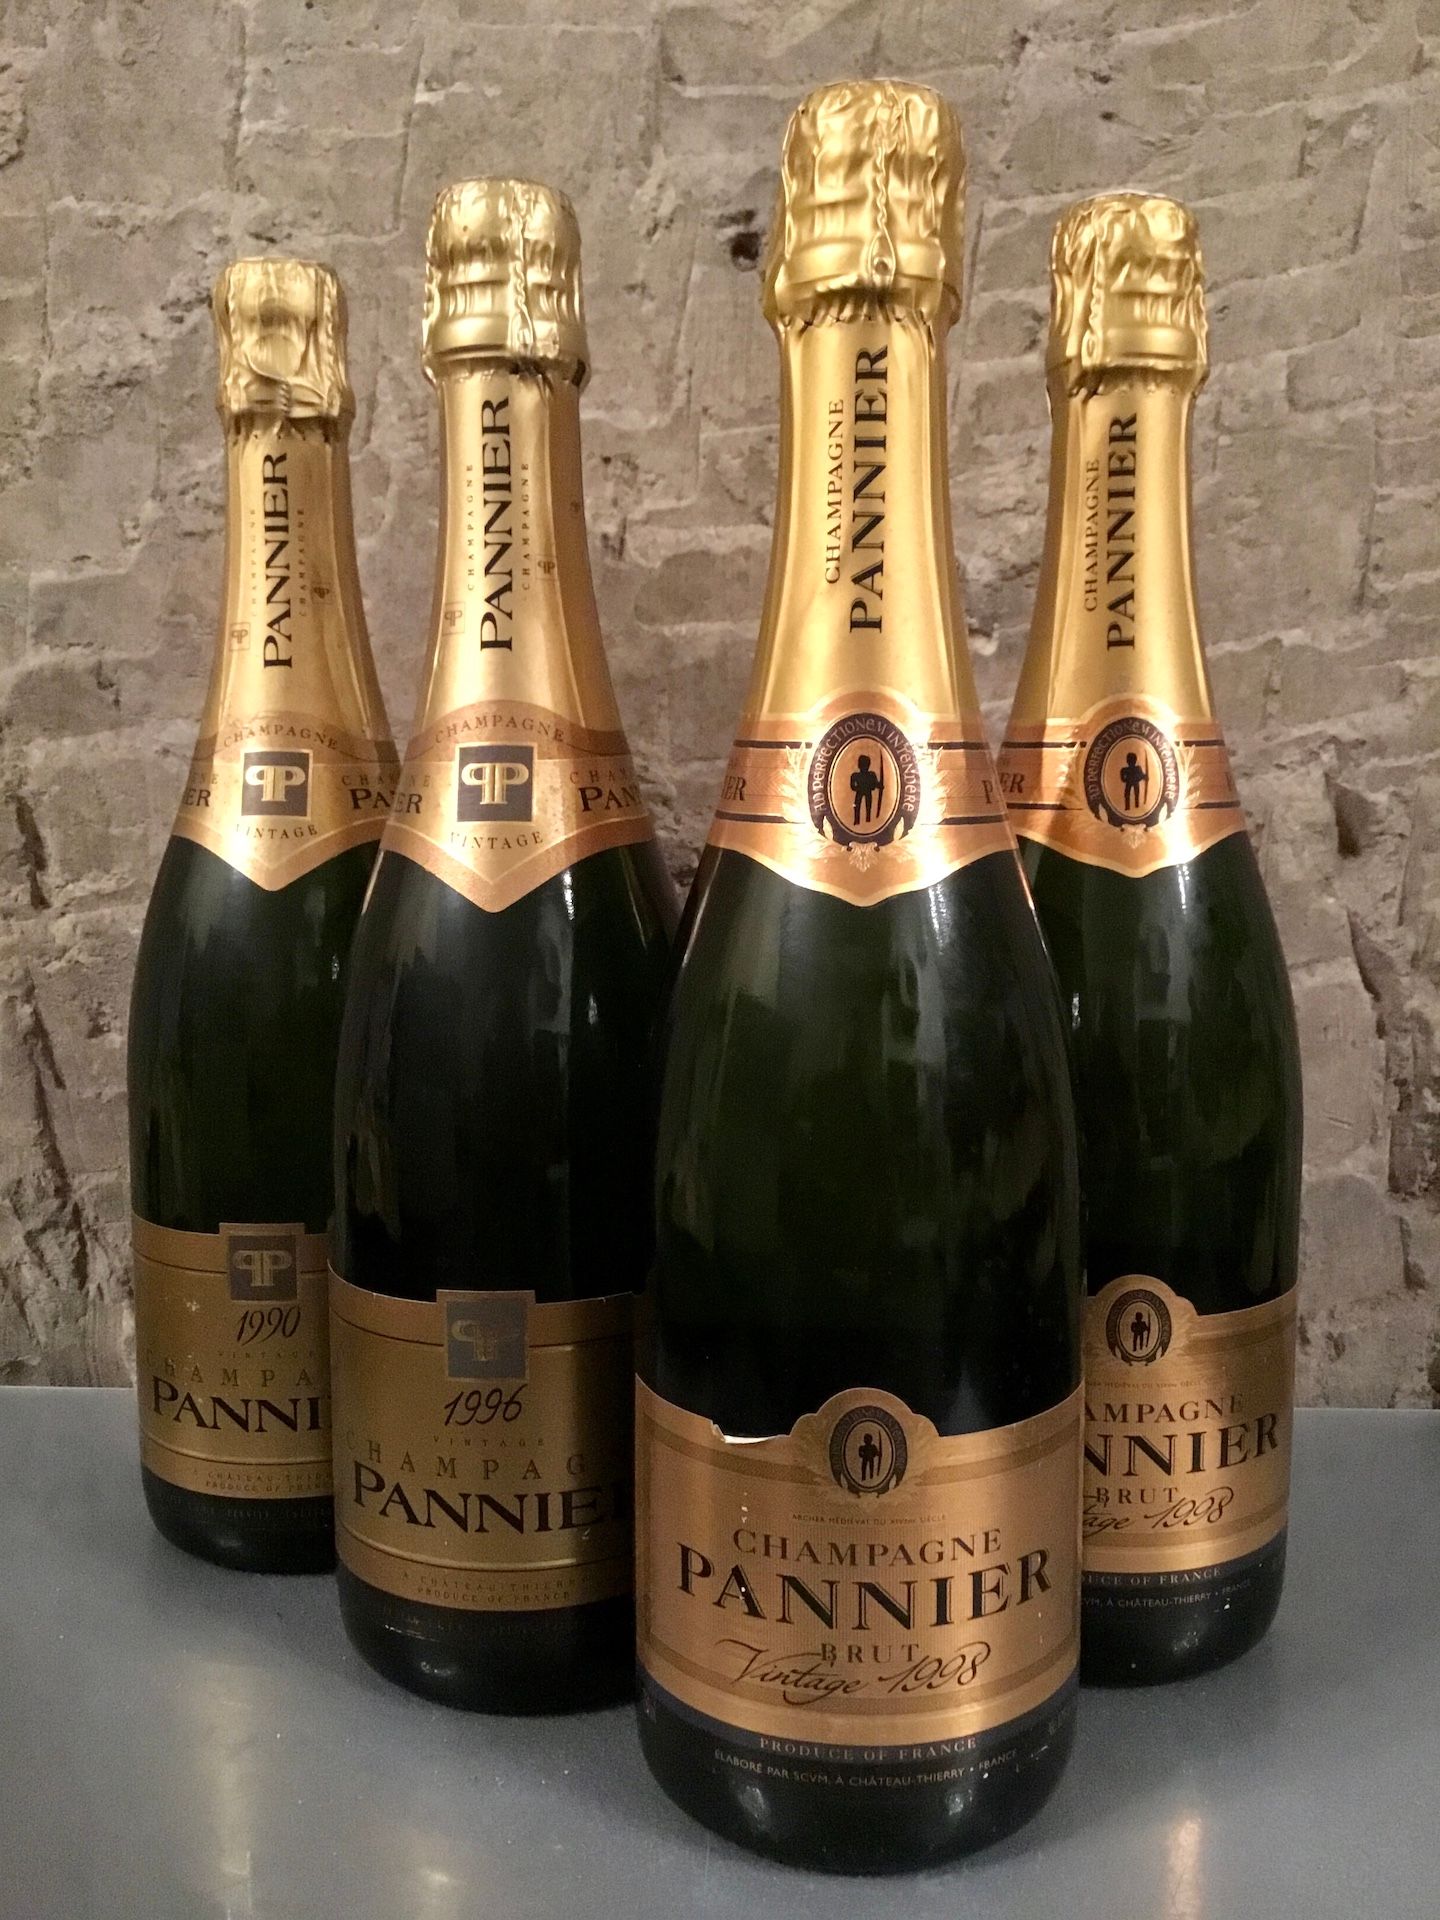 Null 4 bottles of CHAMPAGNE Pannier (2 of 1998, 1 of 1996, 1 of 1990)